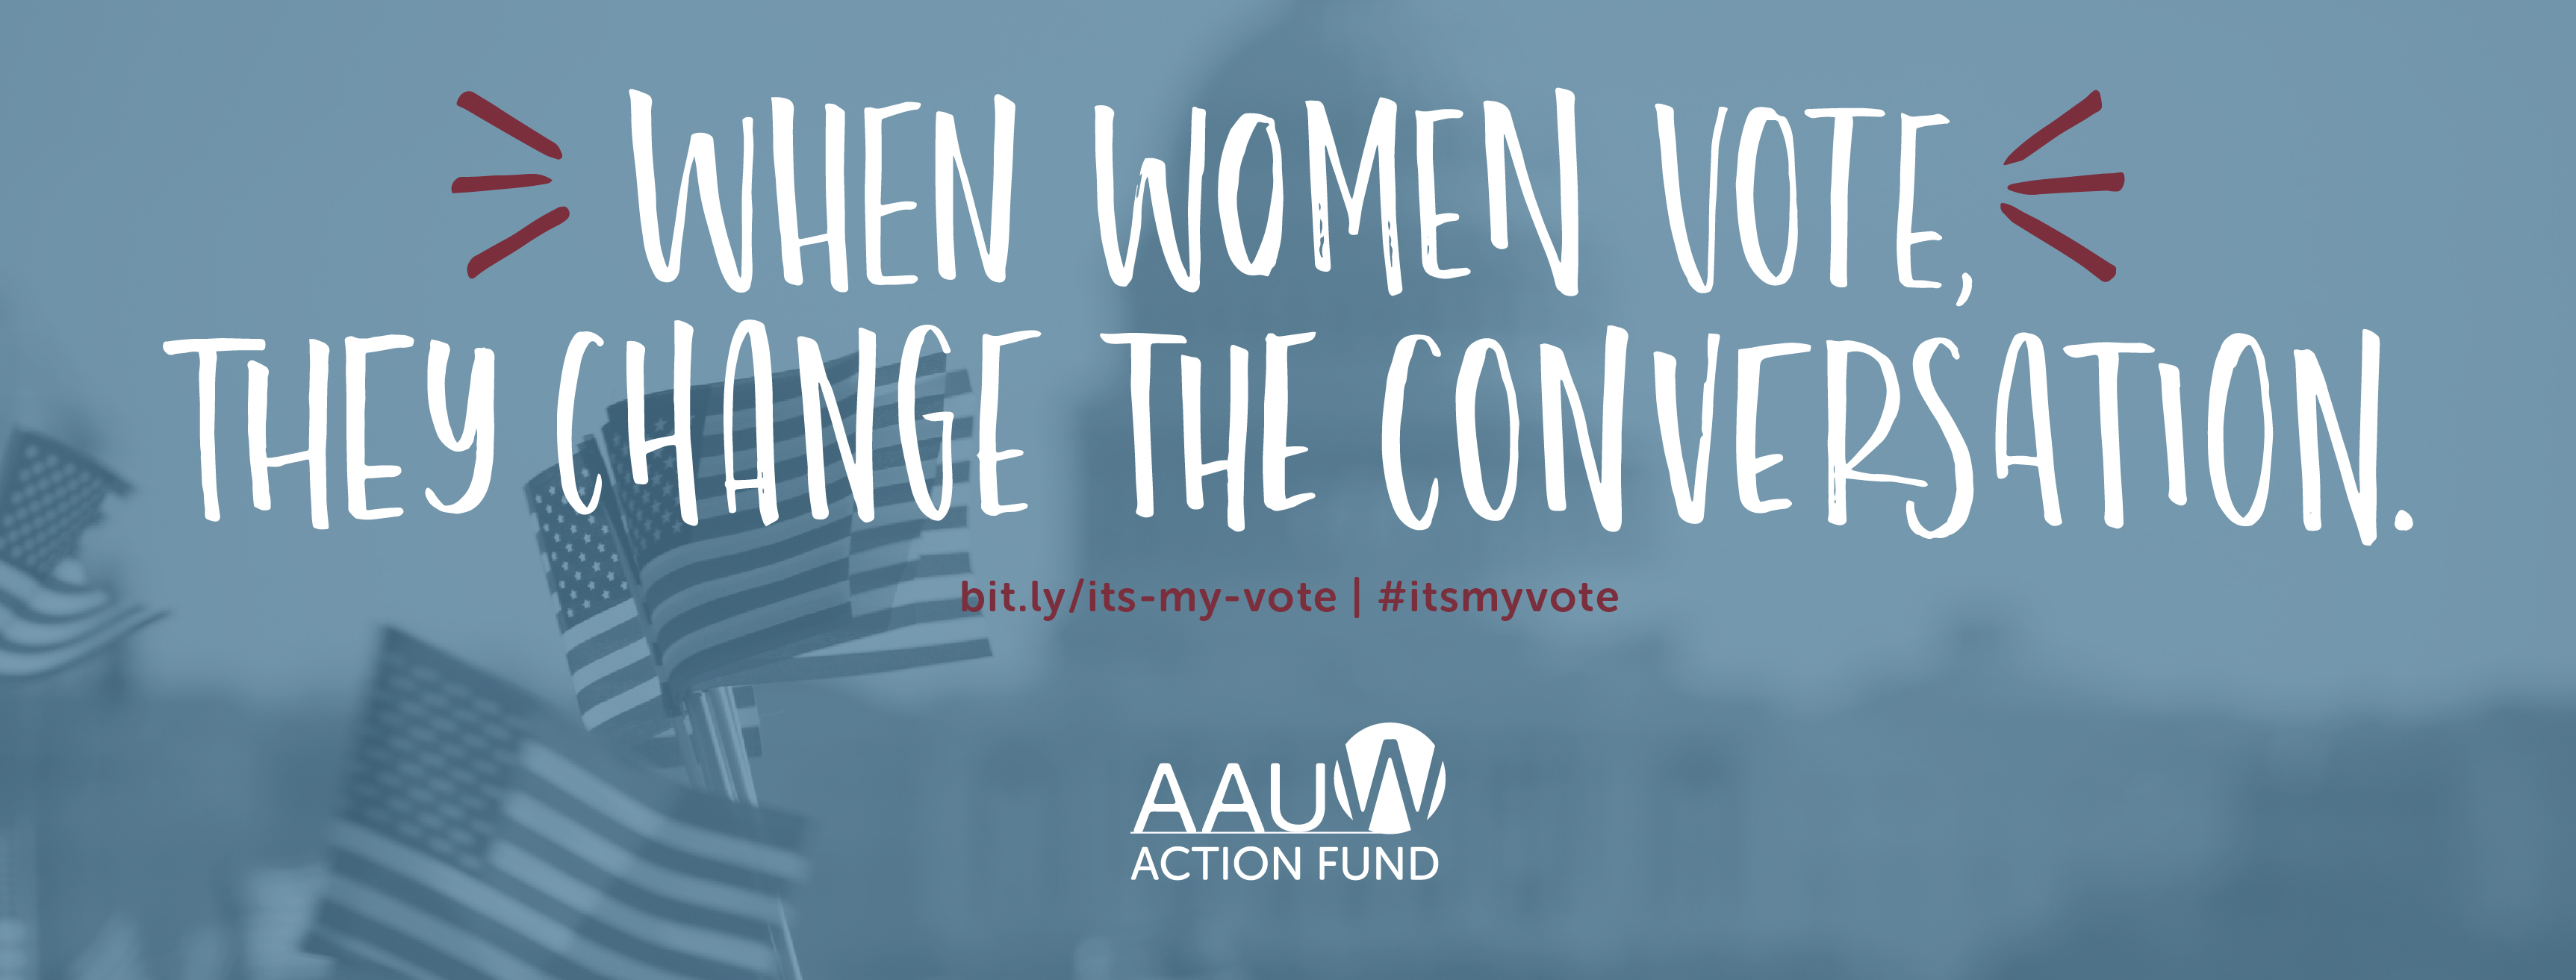 Text overlay AAUW Action Fund: When Women Vote They Change the Conversation: #itsmyvote on background of waving American flags